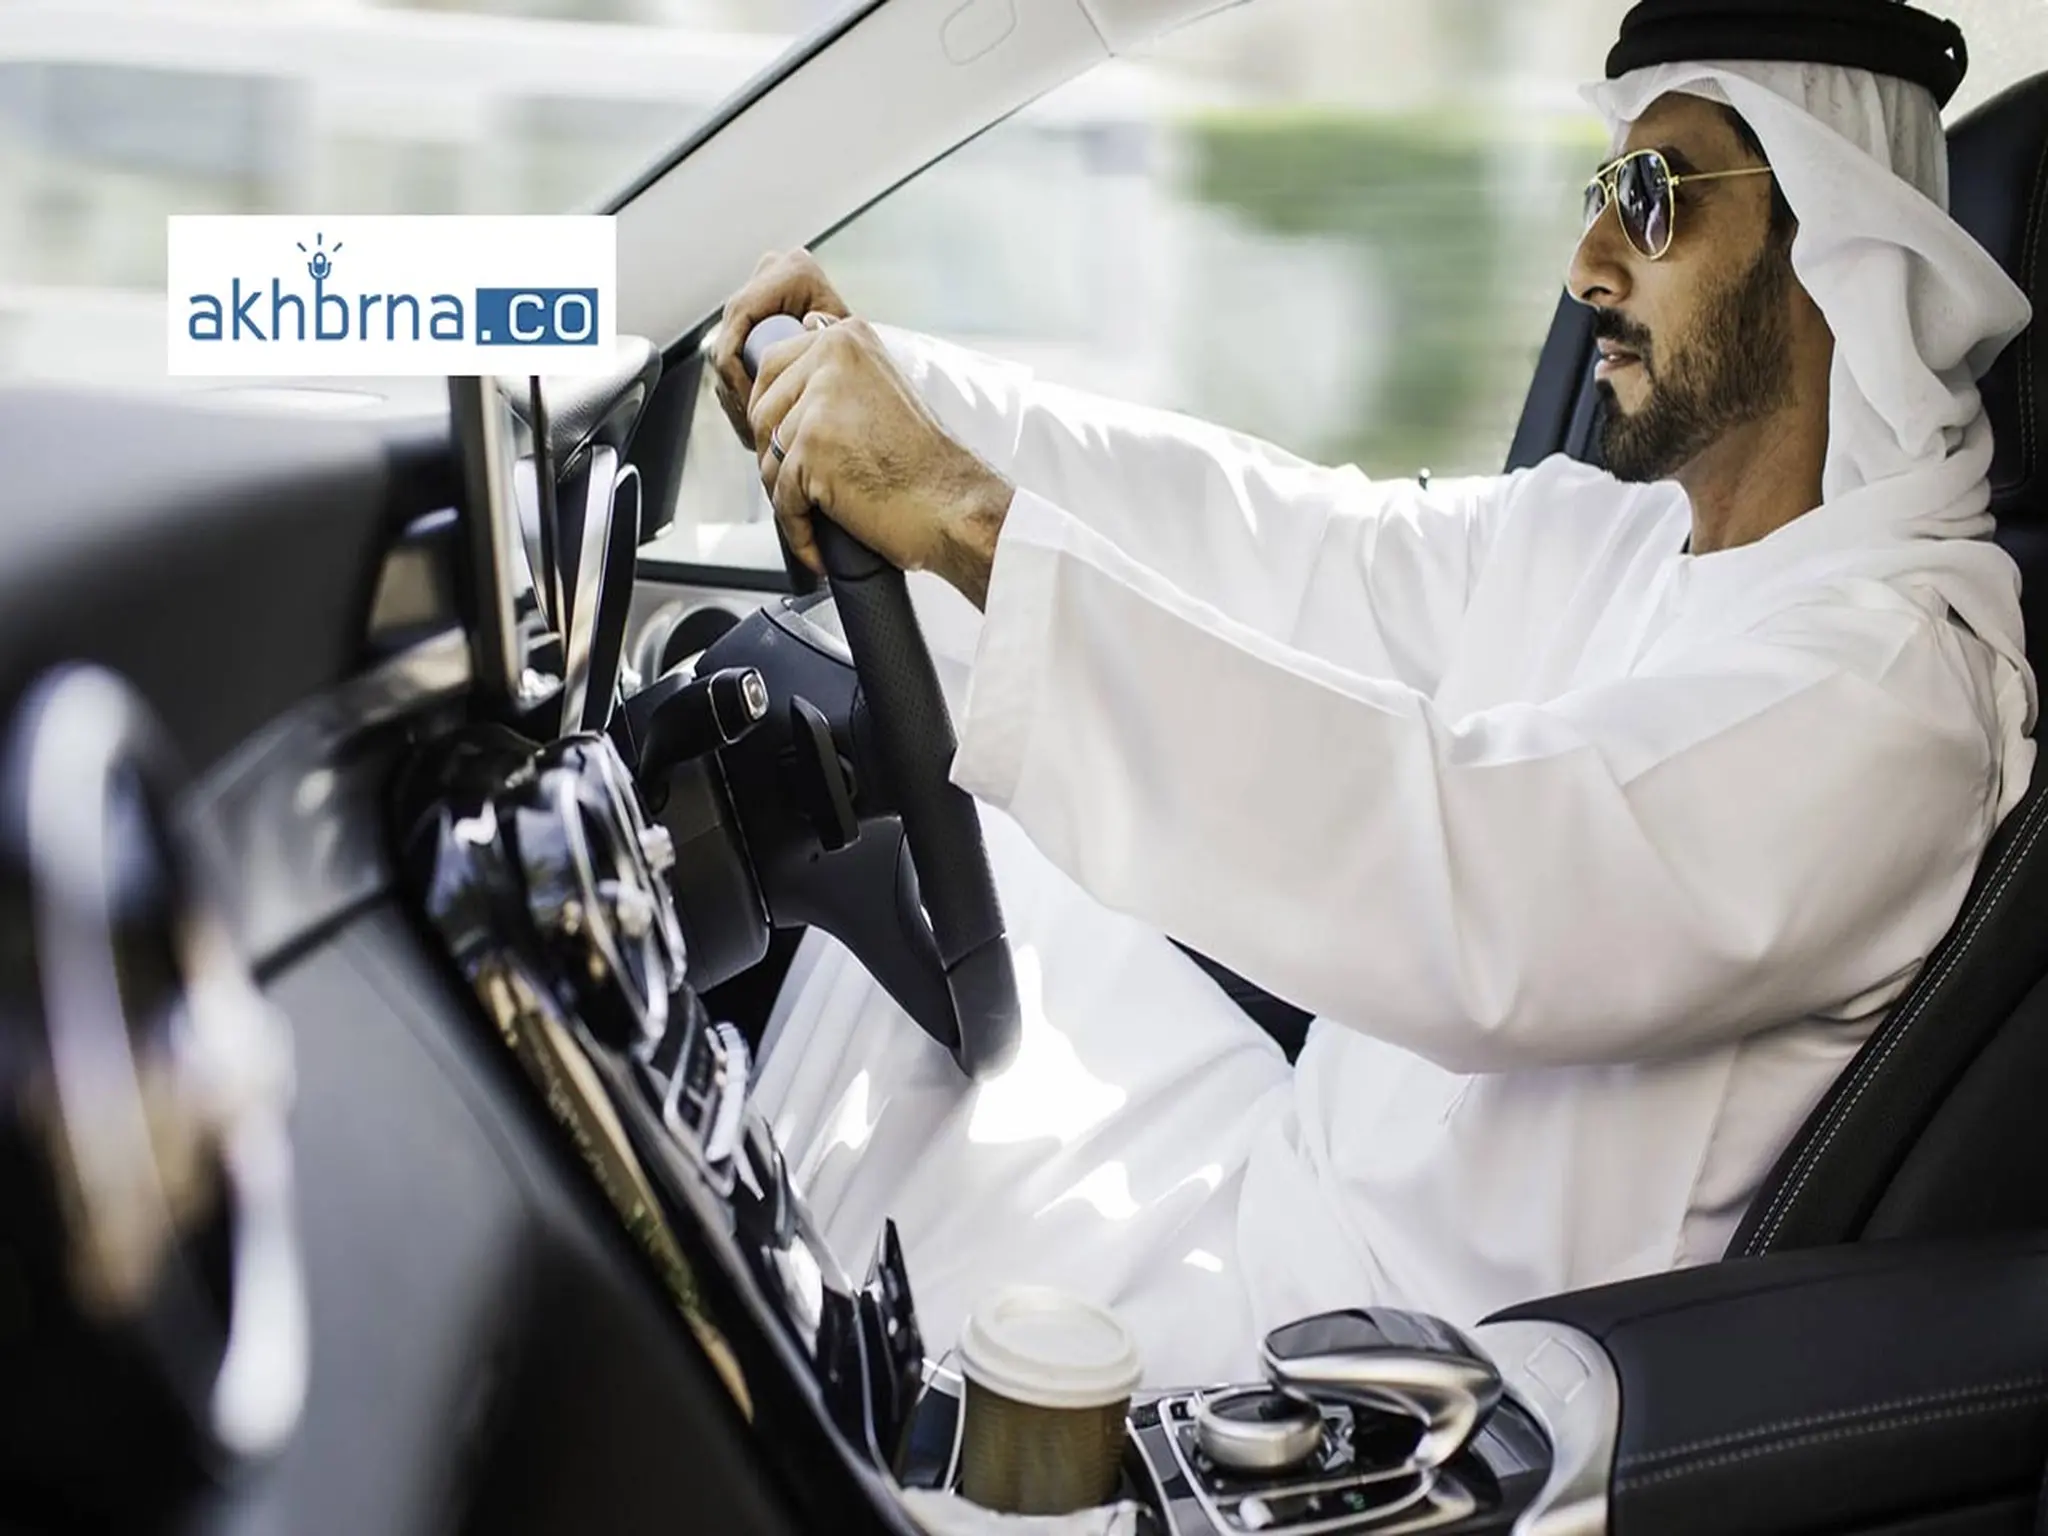 400 dirhams for driving under 120 km/h on these roads in uae